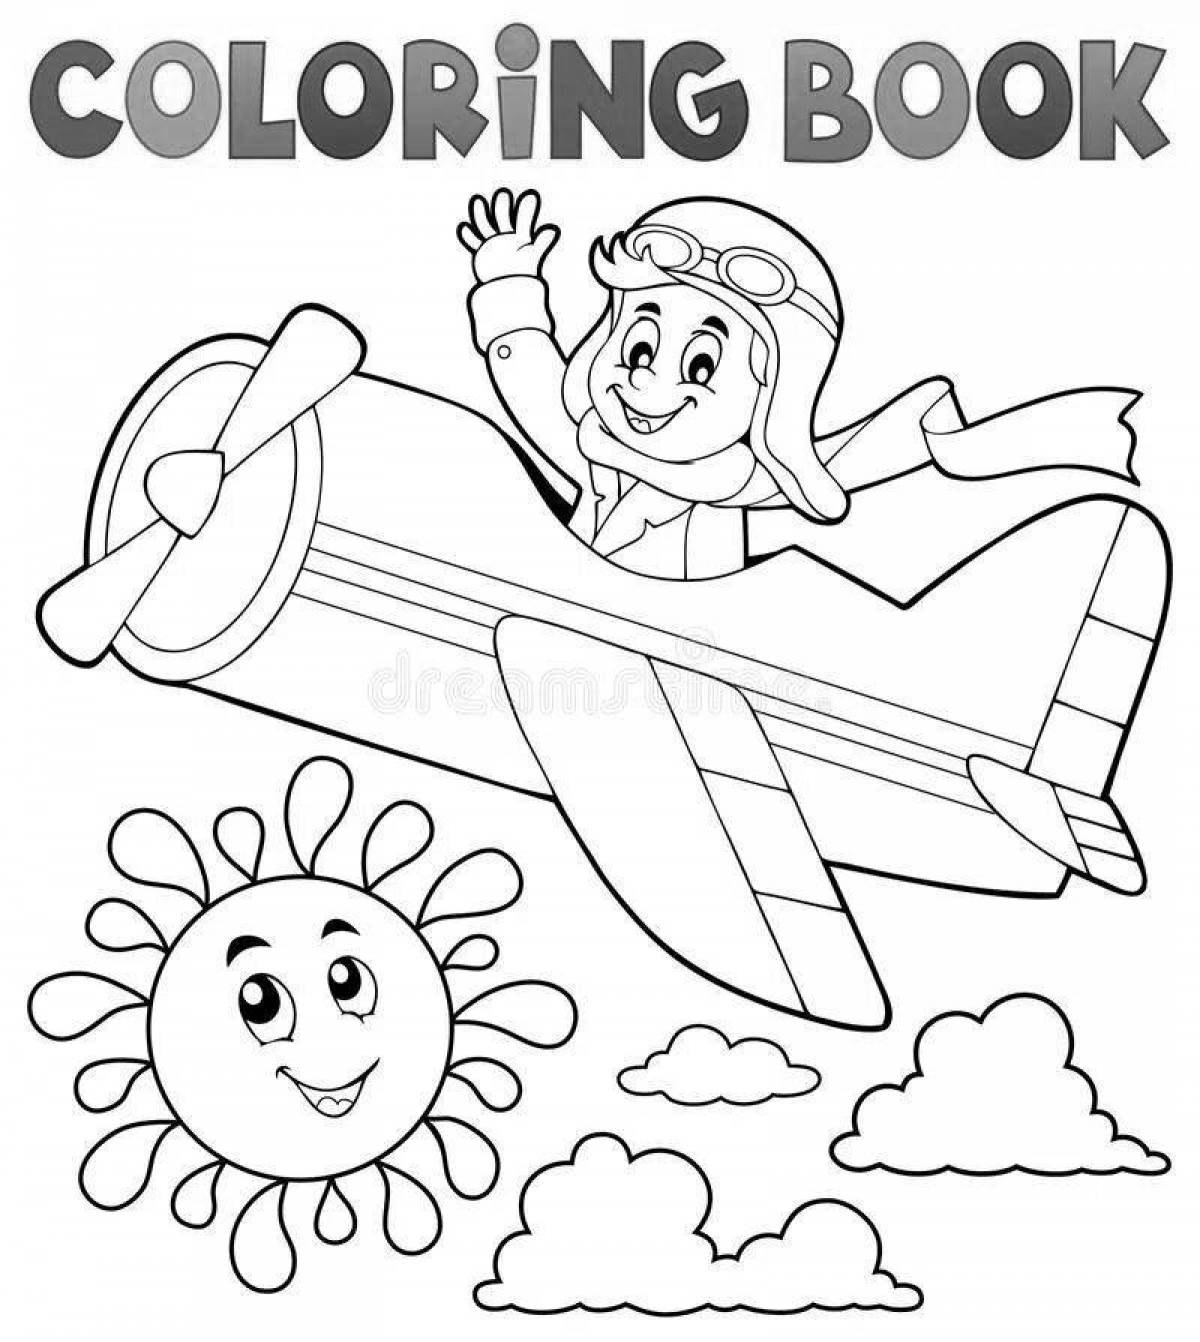 Playful pilot coloring page for kids